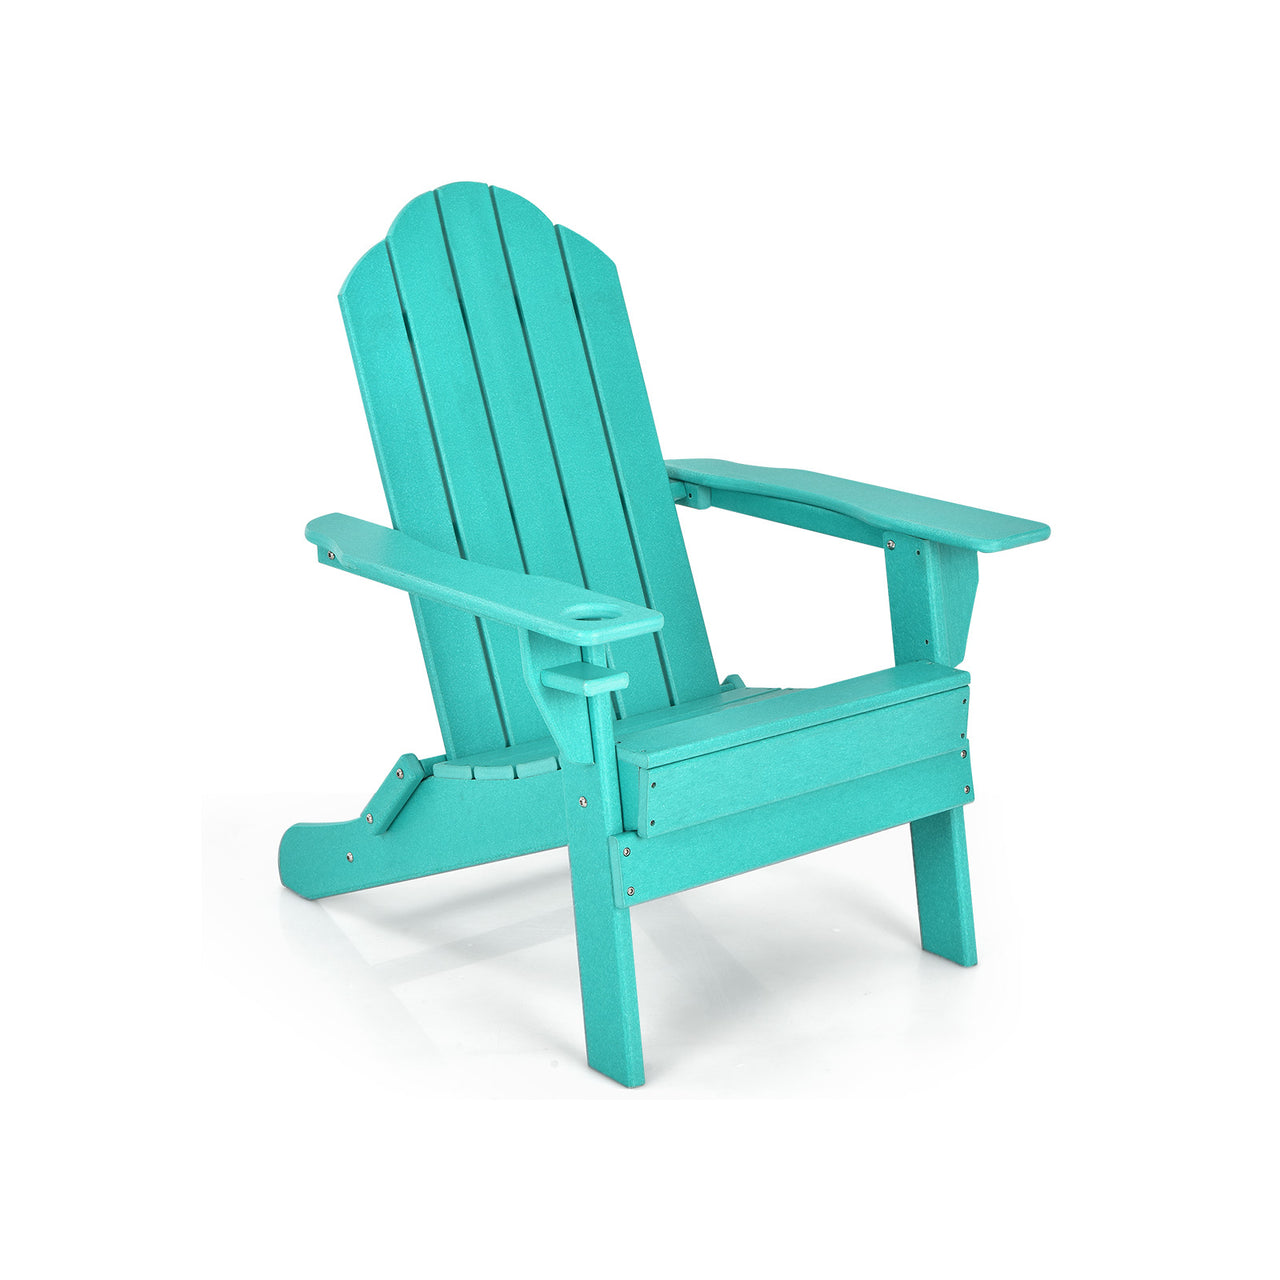 Foldable Weather Resistant Patio Chair with Built-in Cup Holder - Gallery View 1 of 11